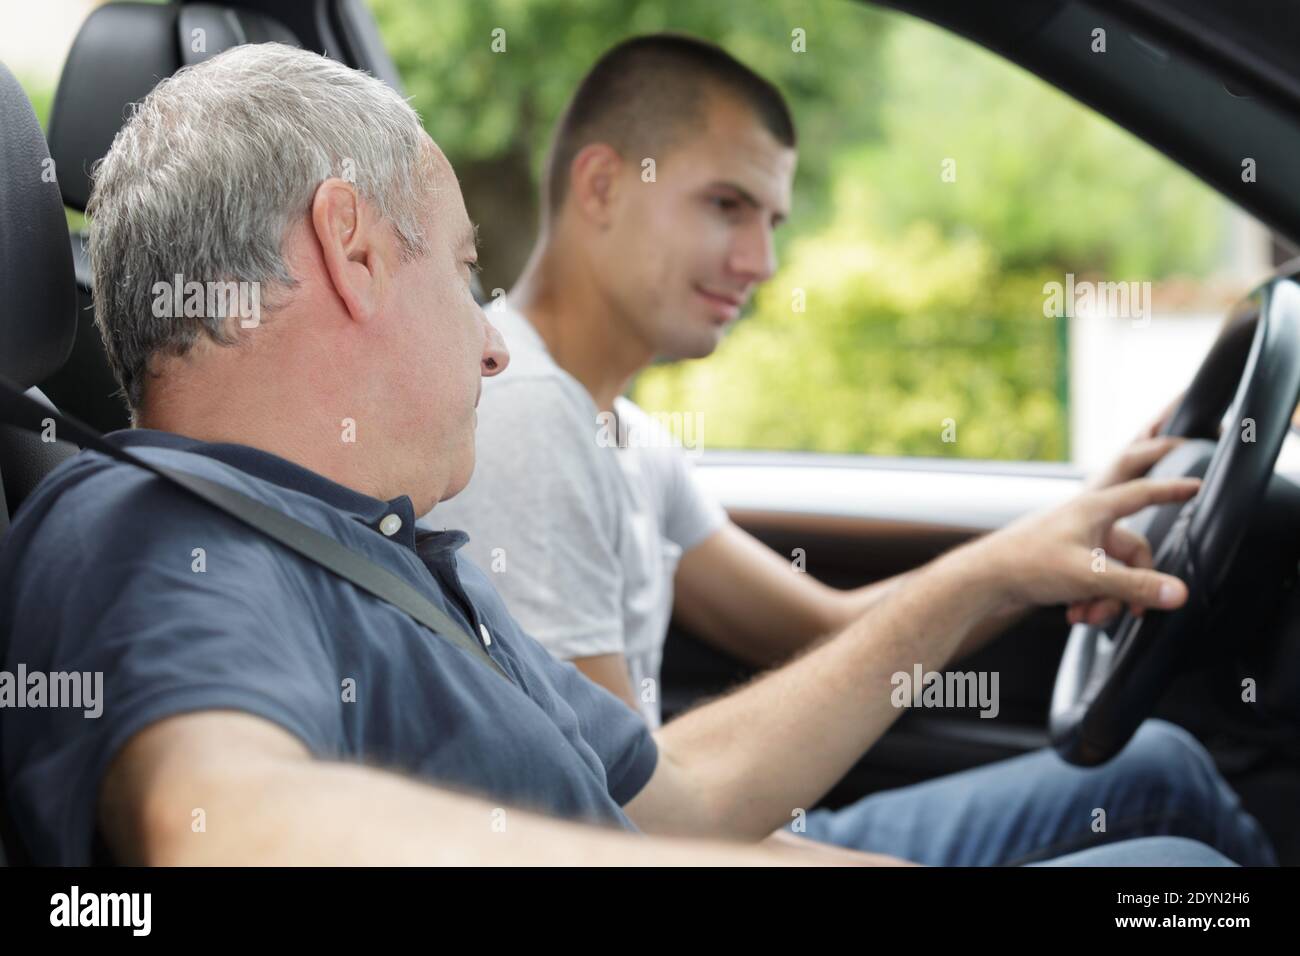 young man having driving lesson Stock Photo